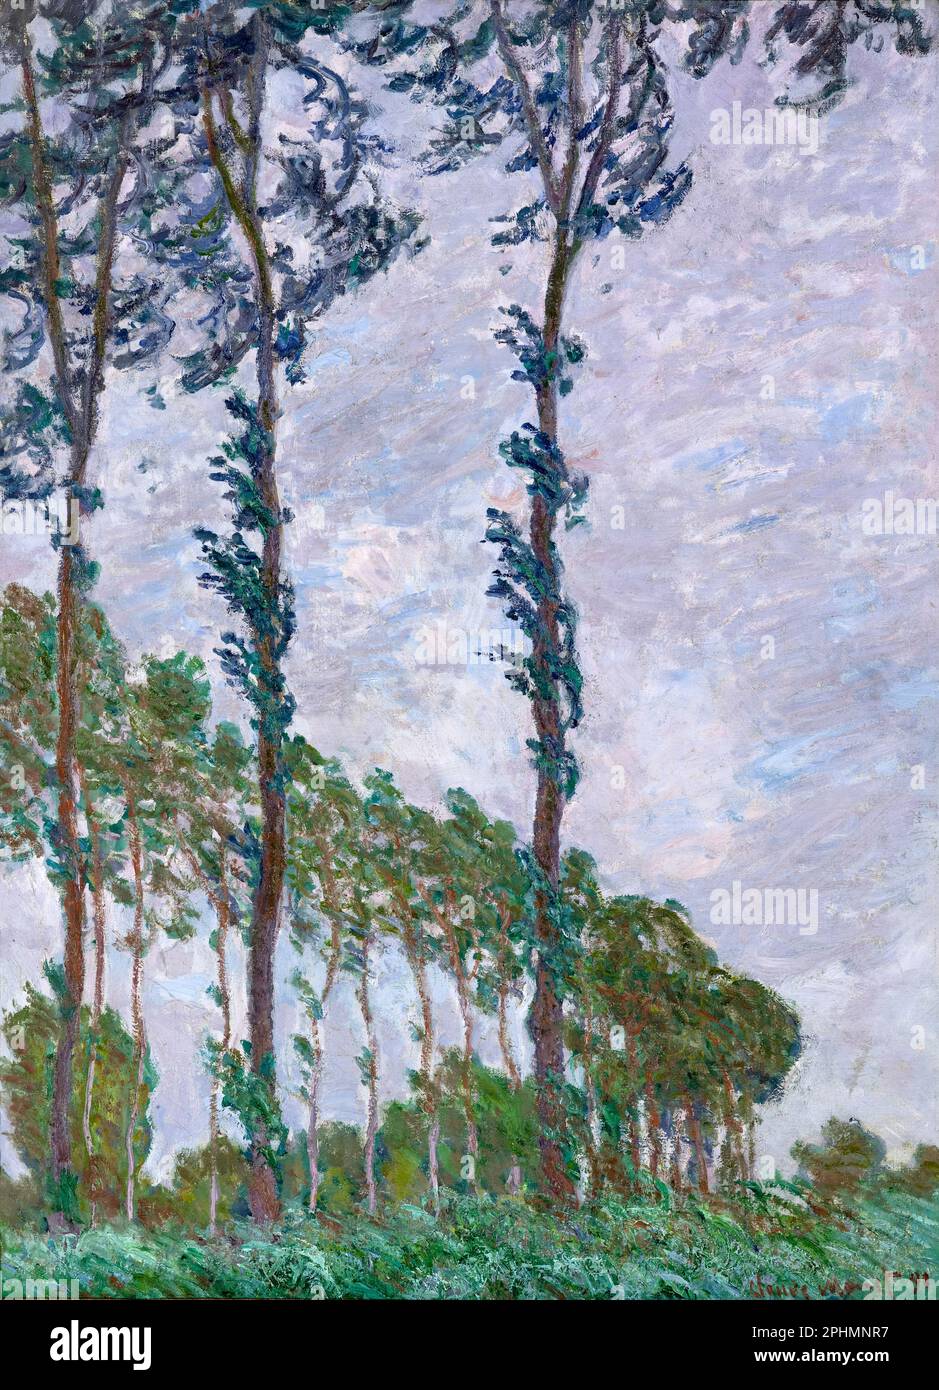 Claude Monet, Wind Effect: Series of The Poplars, landscape painting in oil on canvas, 1891 Stock Photo